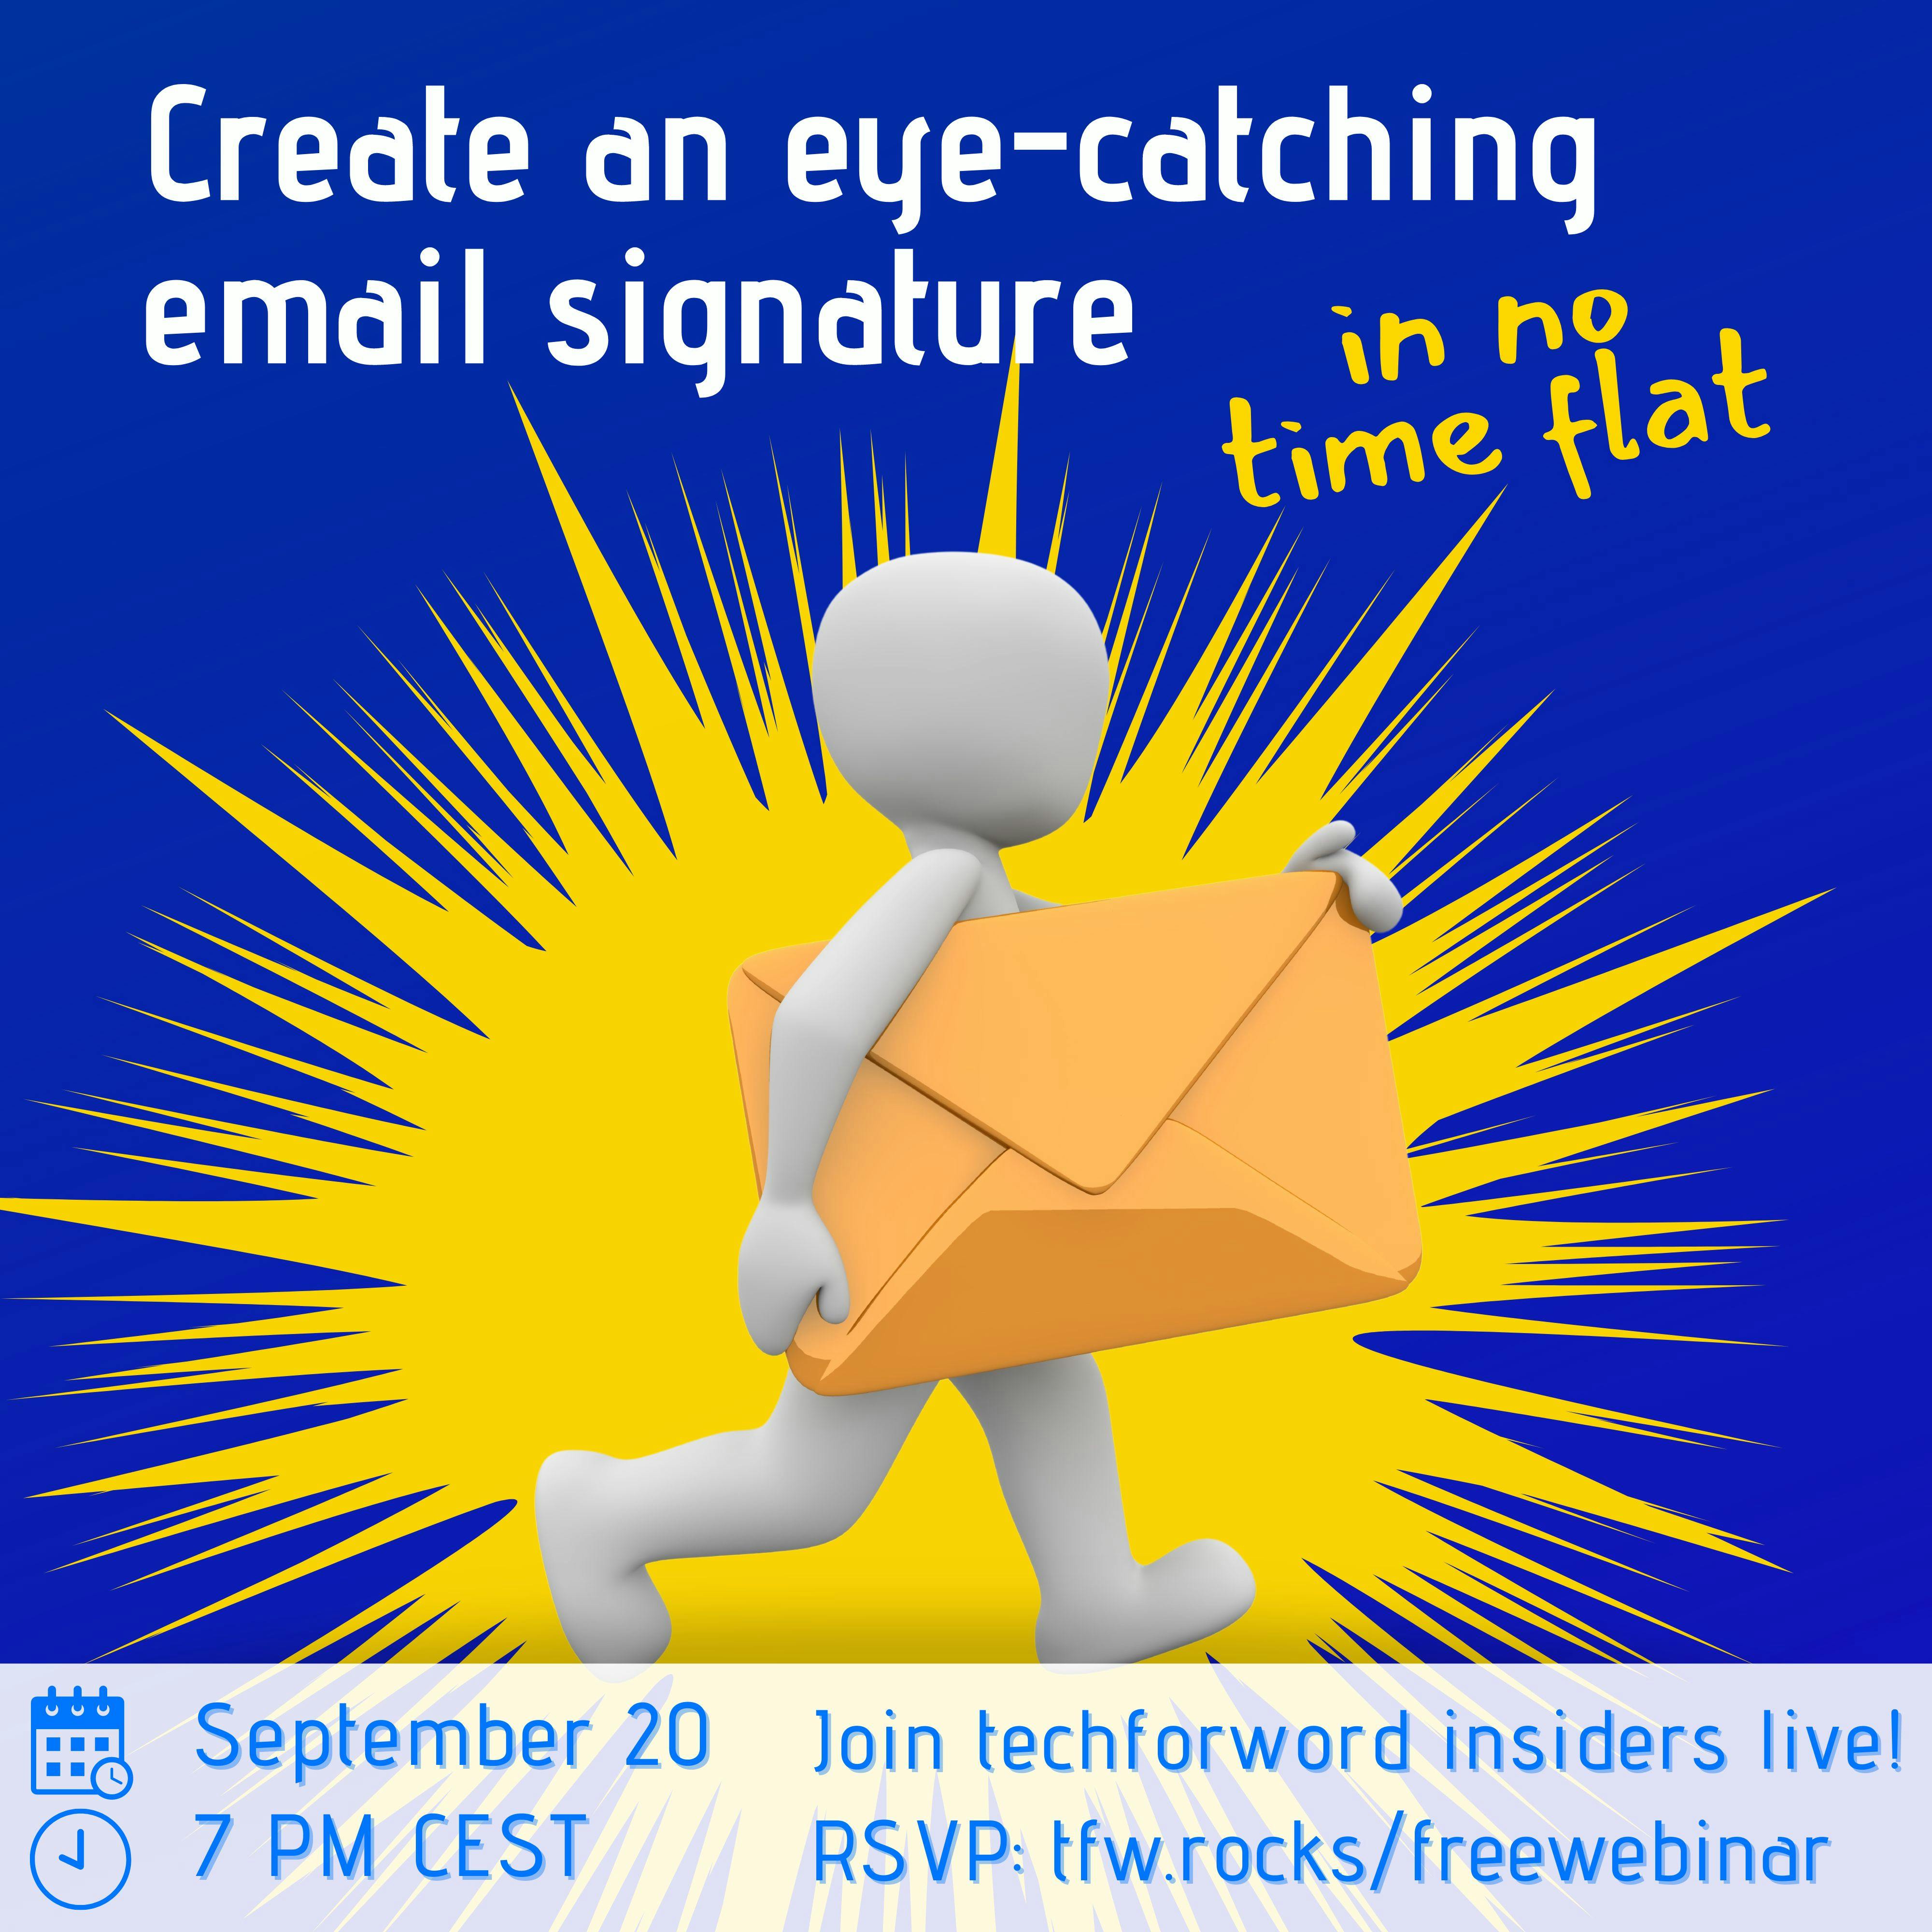 Image of a cartoon person holding an email envelope and walking. The background is dark blue with a comic-typed gold star behind attracting attention to the centre of the image where the cartoon is. The title is: create an eye-catching email signature in no time flat